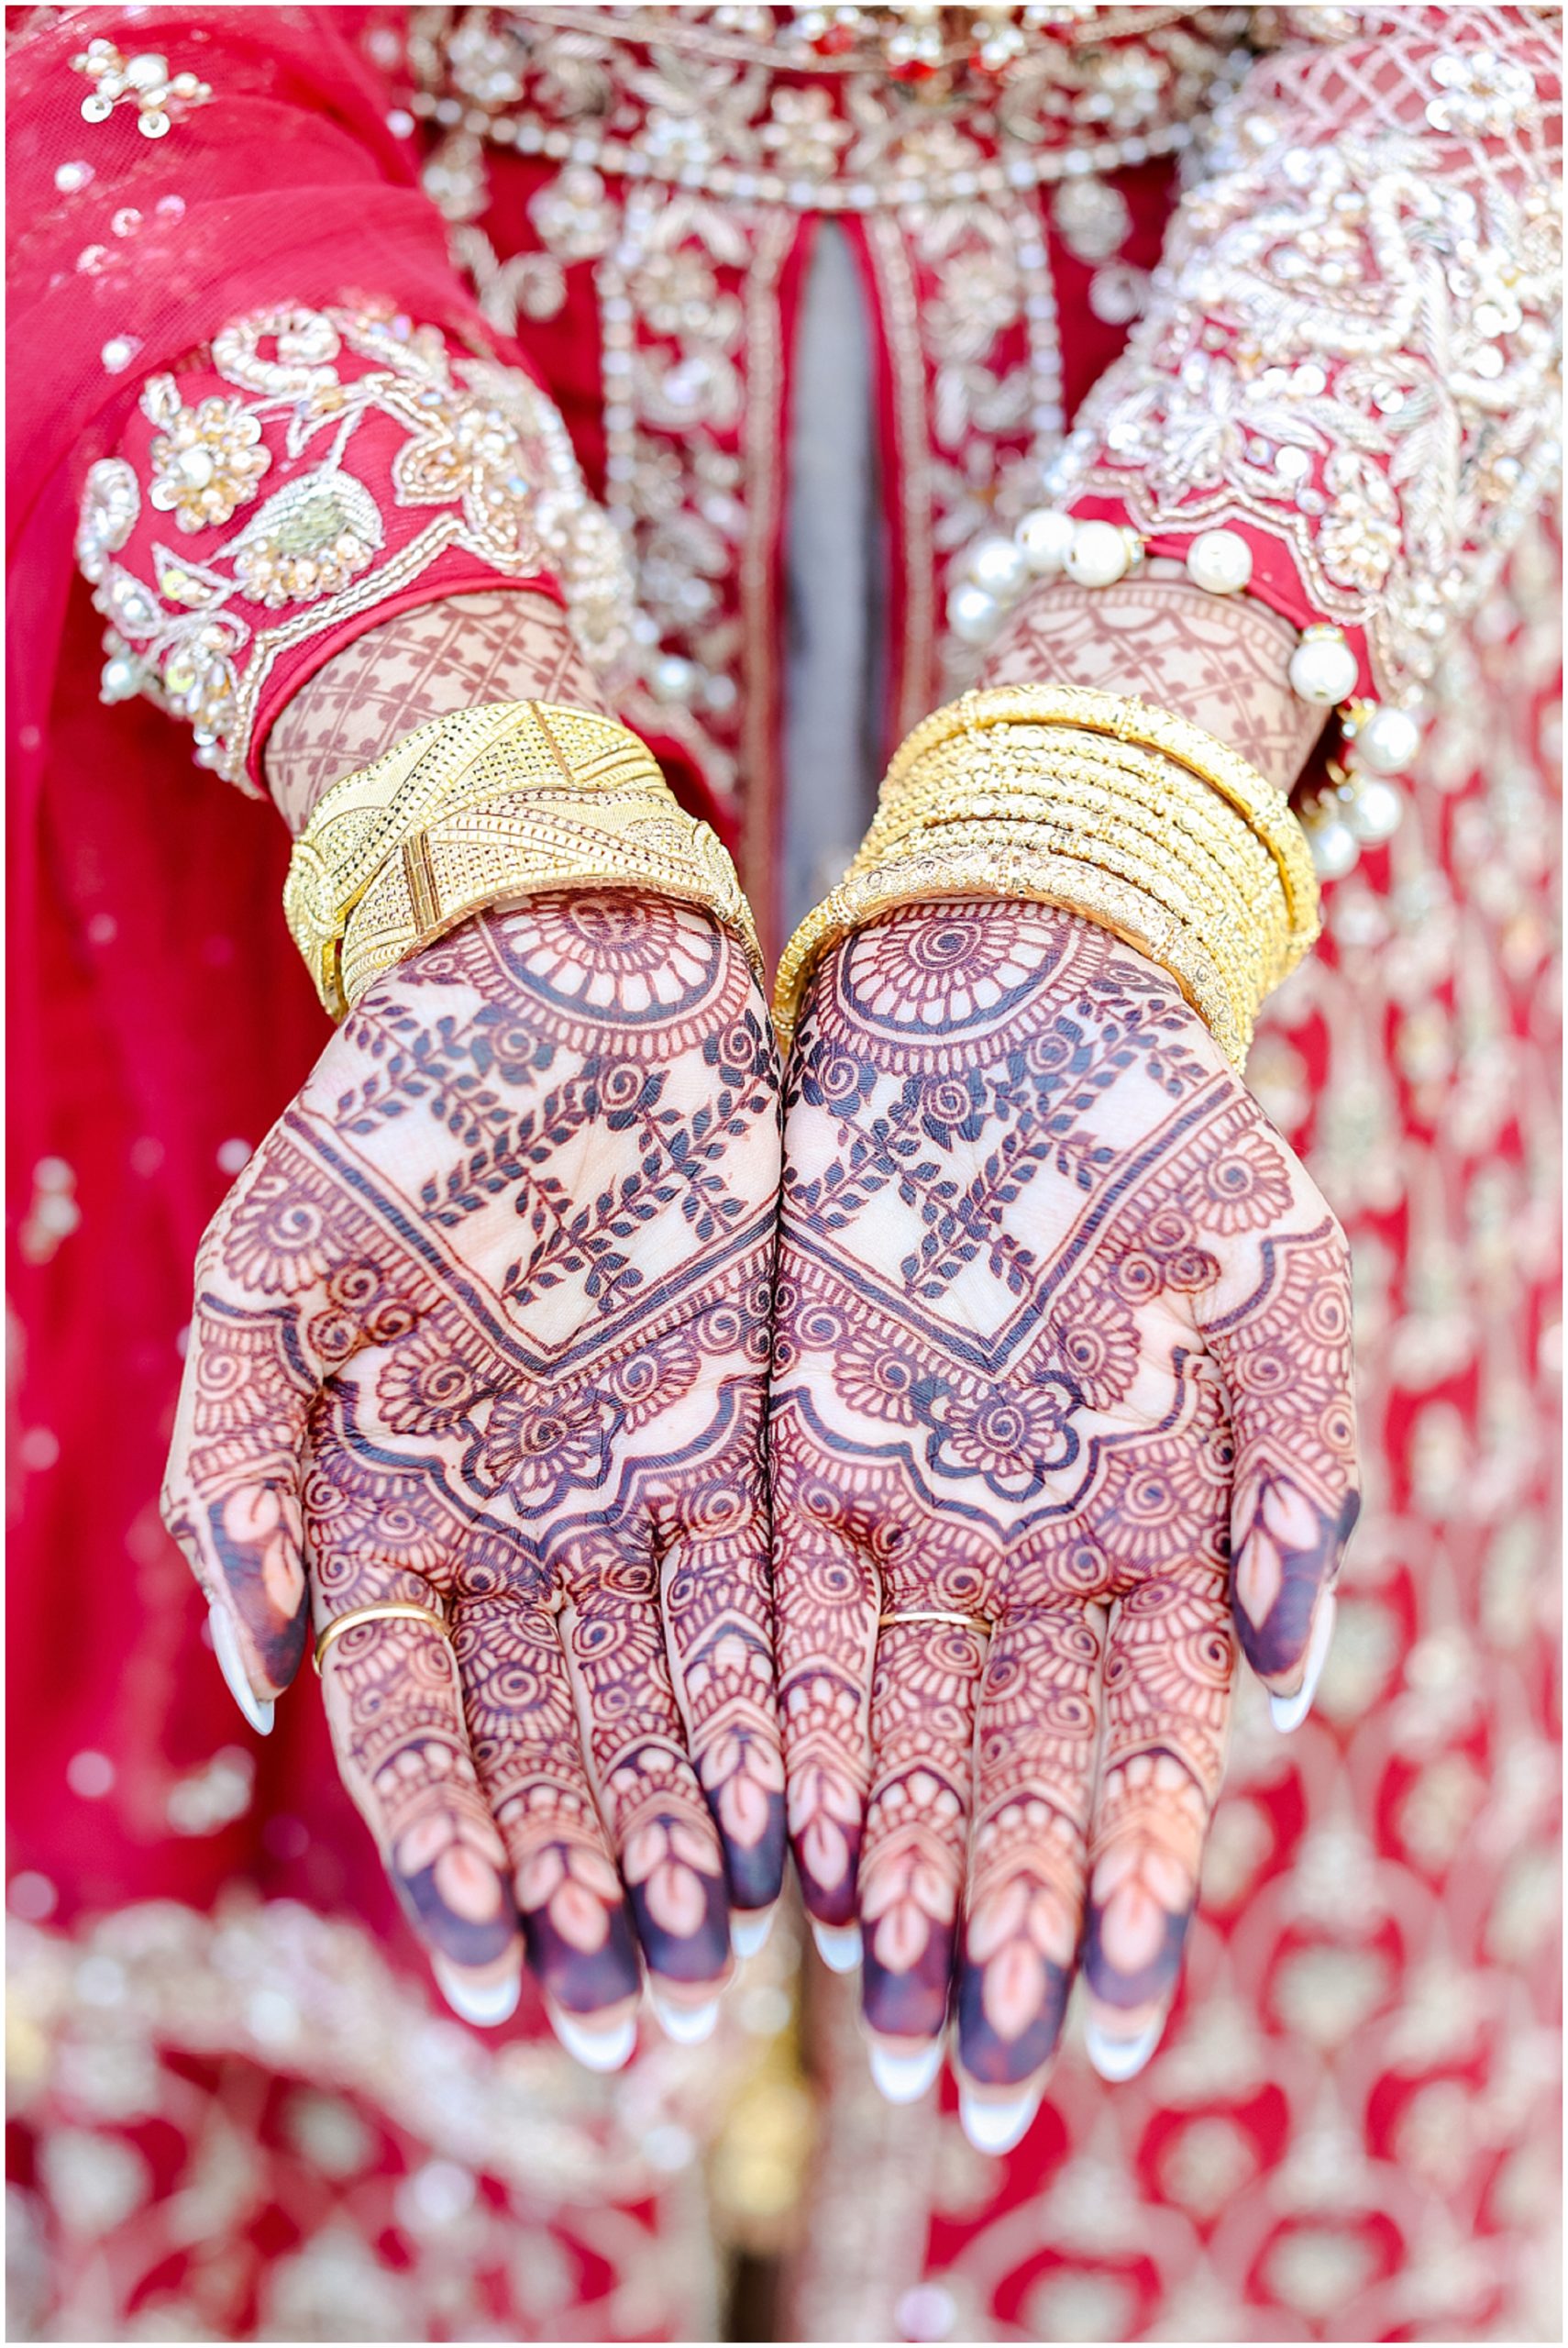 Henna Hands Ideas and Patterns - Pakistani Indian Wedding in Kansas City at the Overland Park Marriott photographed by Mariam Saifan Photography | Red Indian Pakistani Muslim Wedding Dress | Hair & Makeup Ideas | Best Wedding Photographer in Kansas City and Destination Weddings